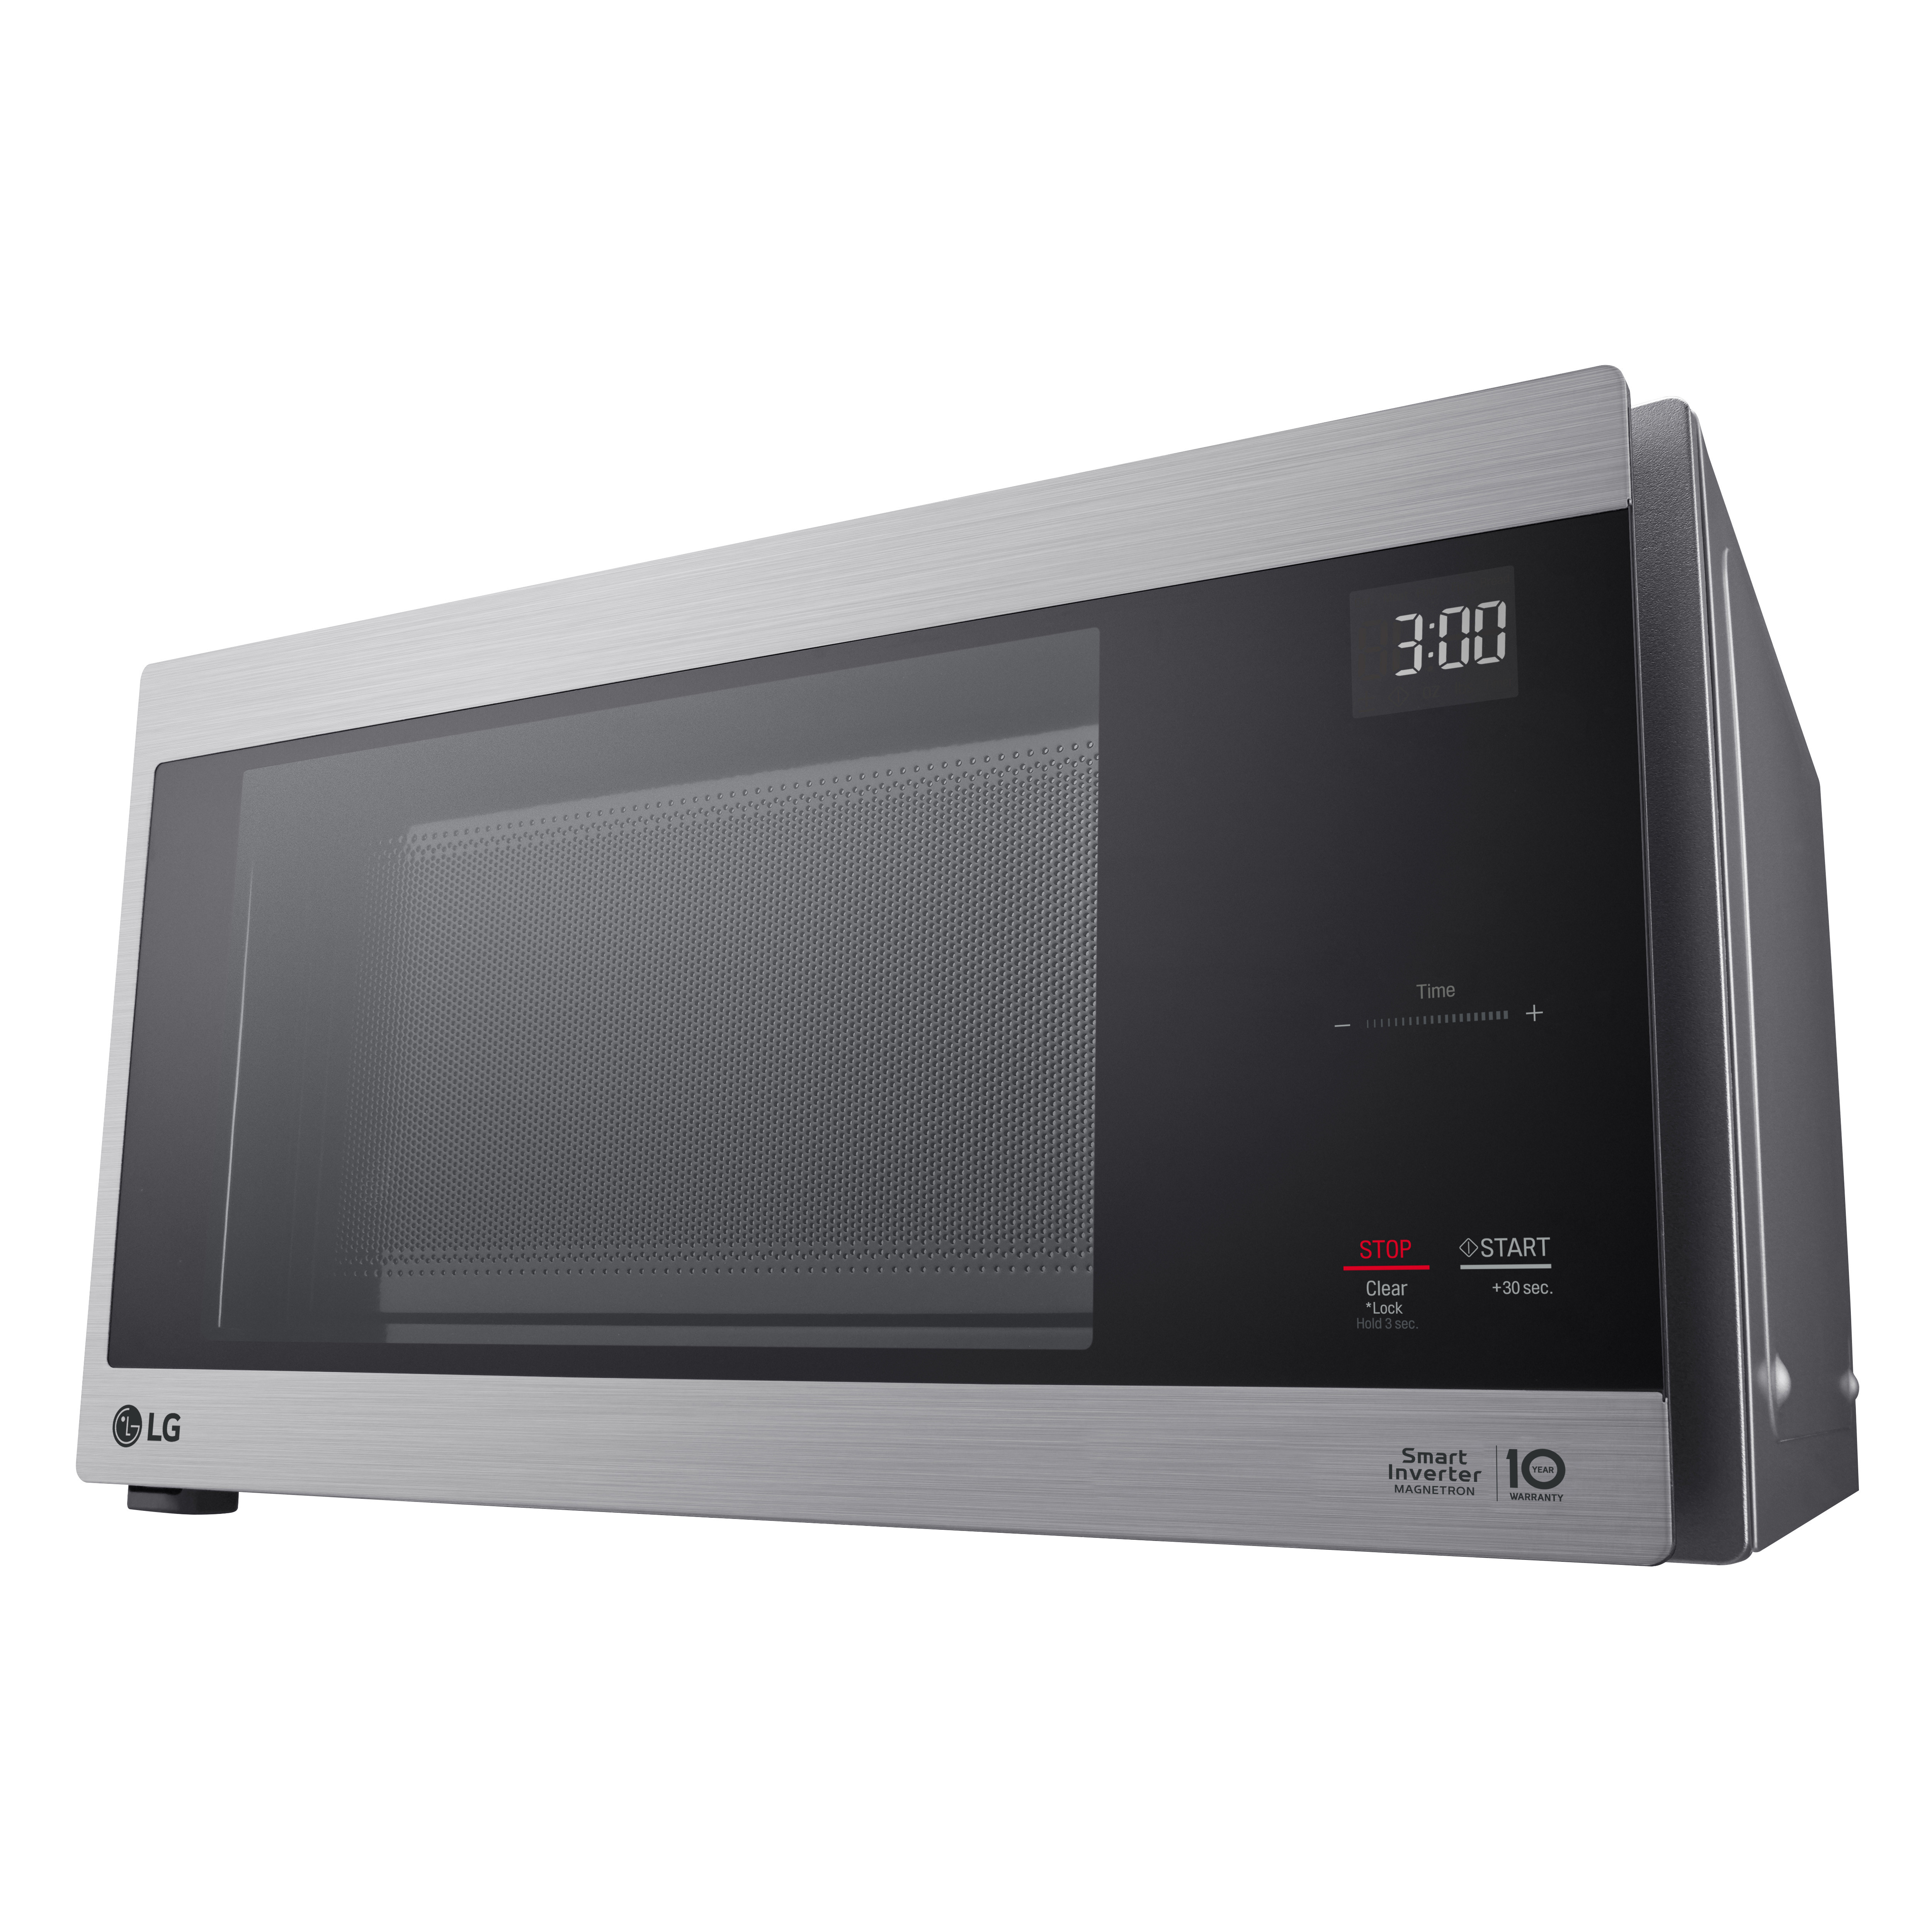 LG Neo Chef 1.5 cu. ft. Countertop Microwave Oven, 1200 Watts, Stainless Steel - image 5 of 15